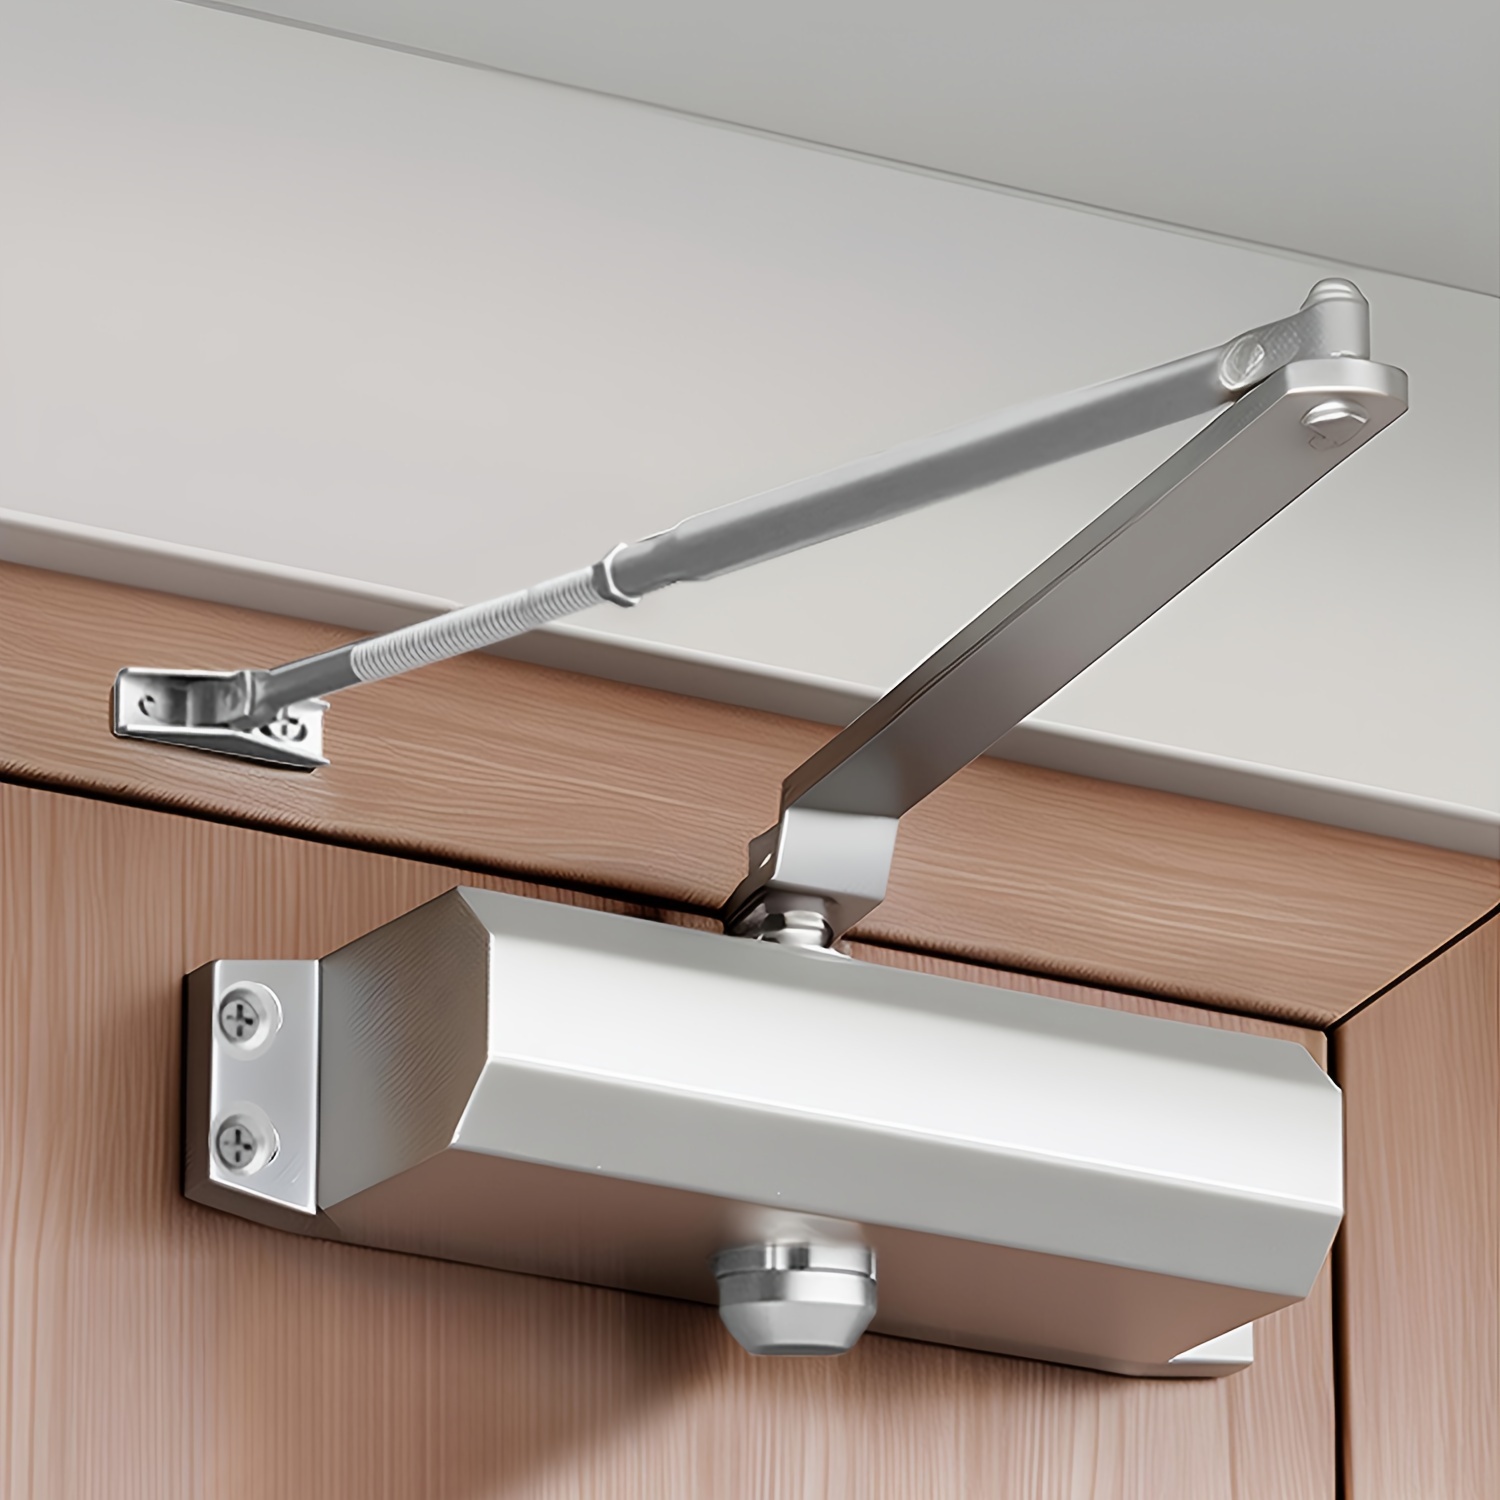 

Silent Automatic Door Closer With Touch & Remote Control - Matte Finish Metal Construction